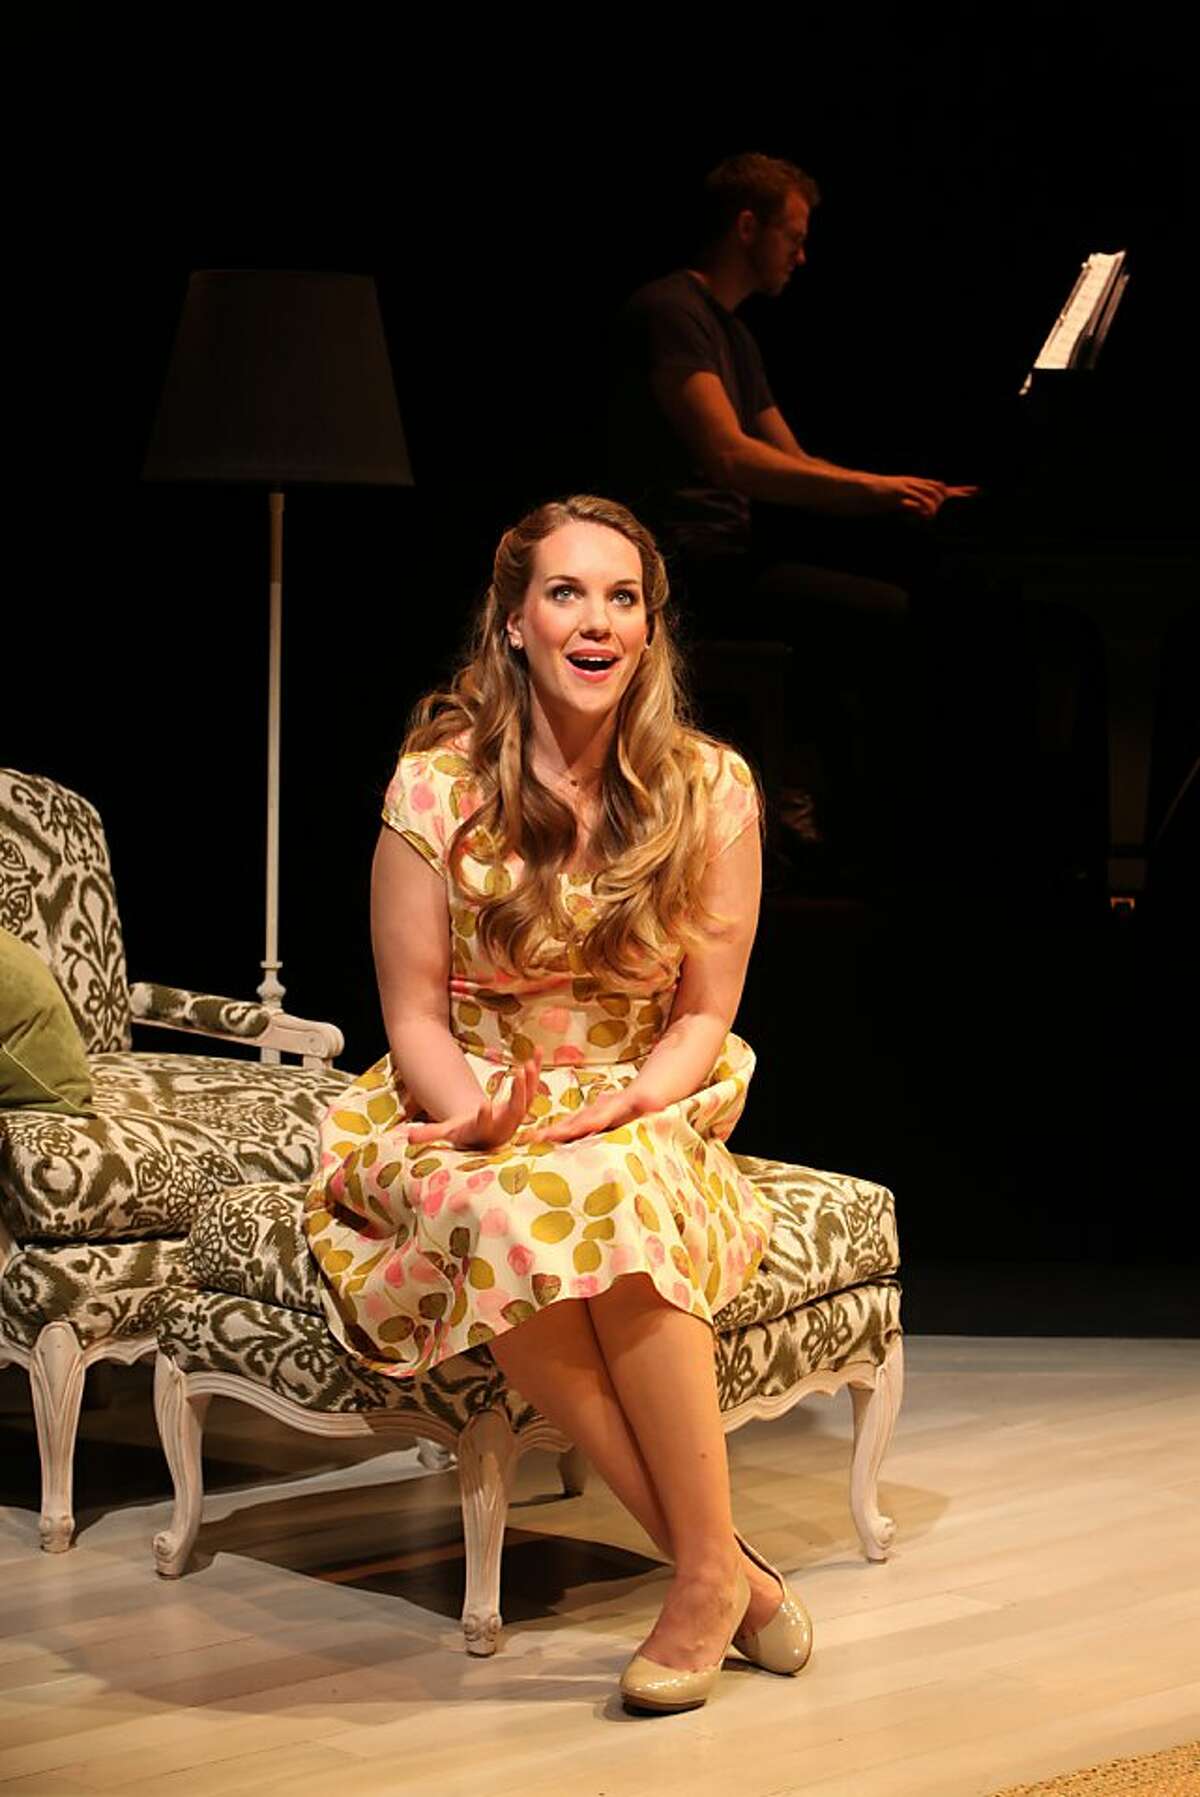 Analisa Leaming as Sara Jane, a wife trying to make the best of things while her husband is at war, in the world premiere musical "Arlington" at Magic Theatre. (pianist in background is Jeff Pew)